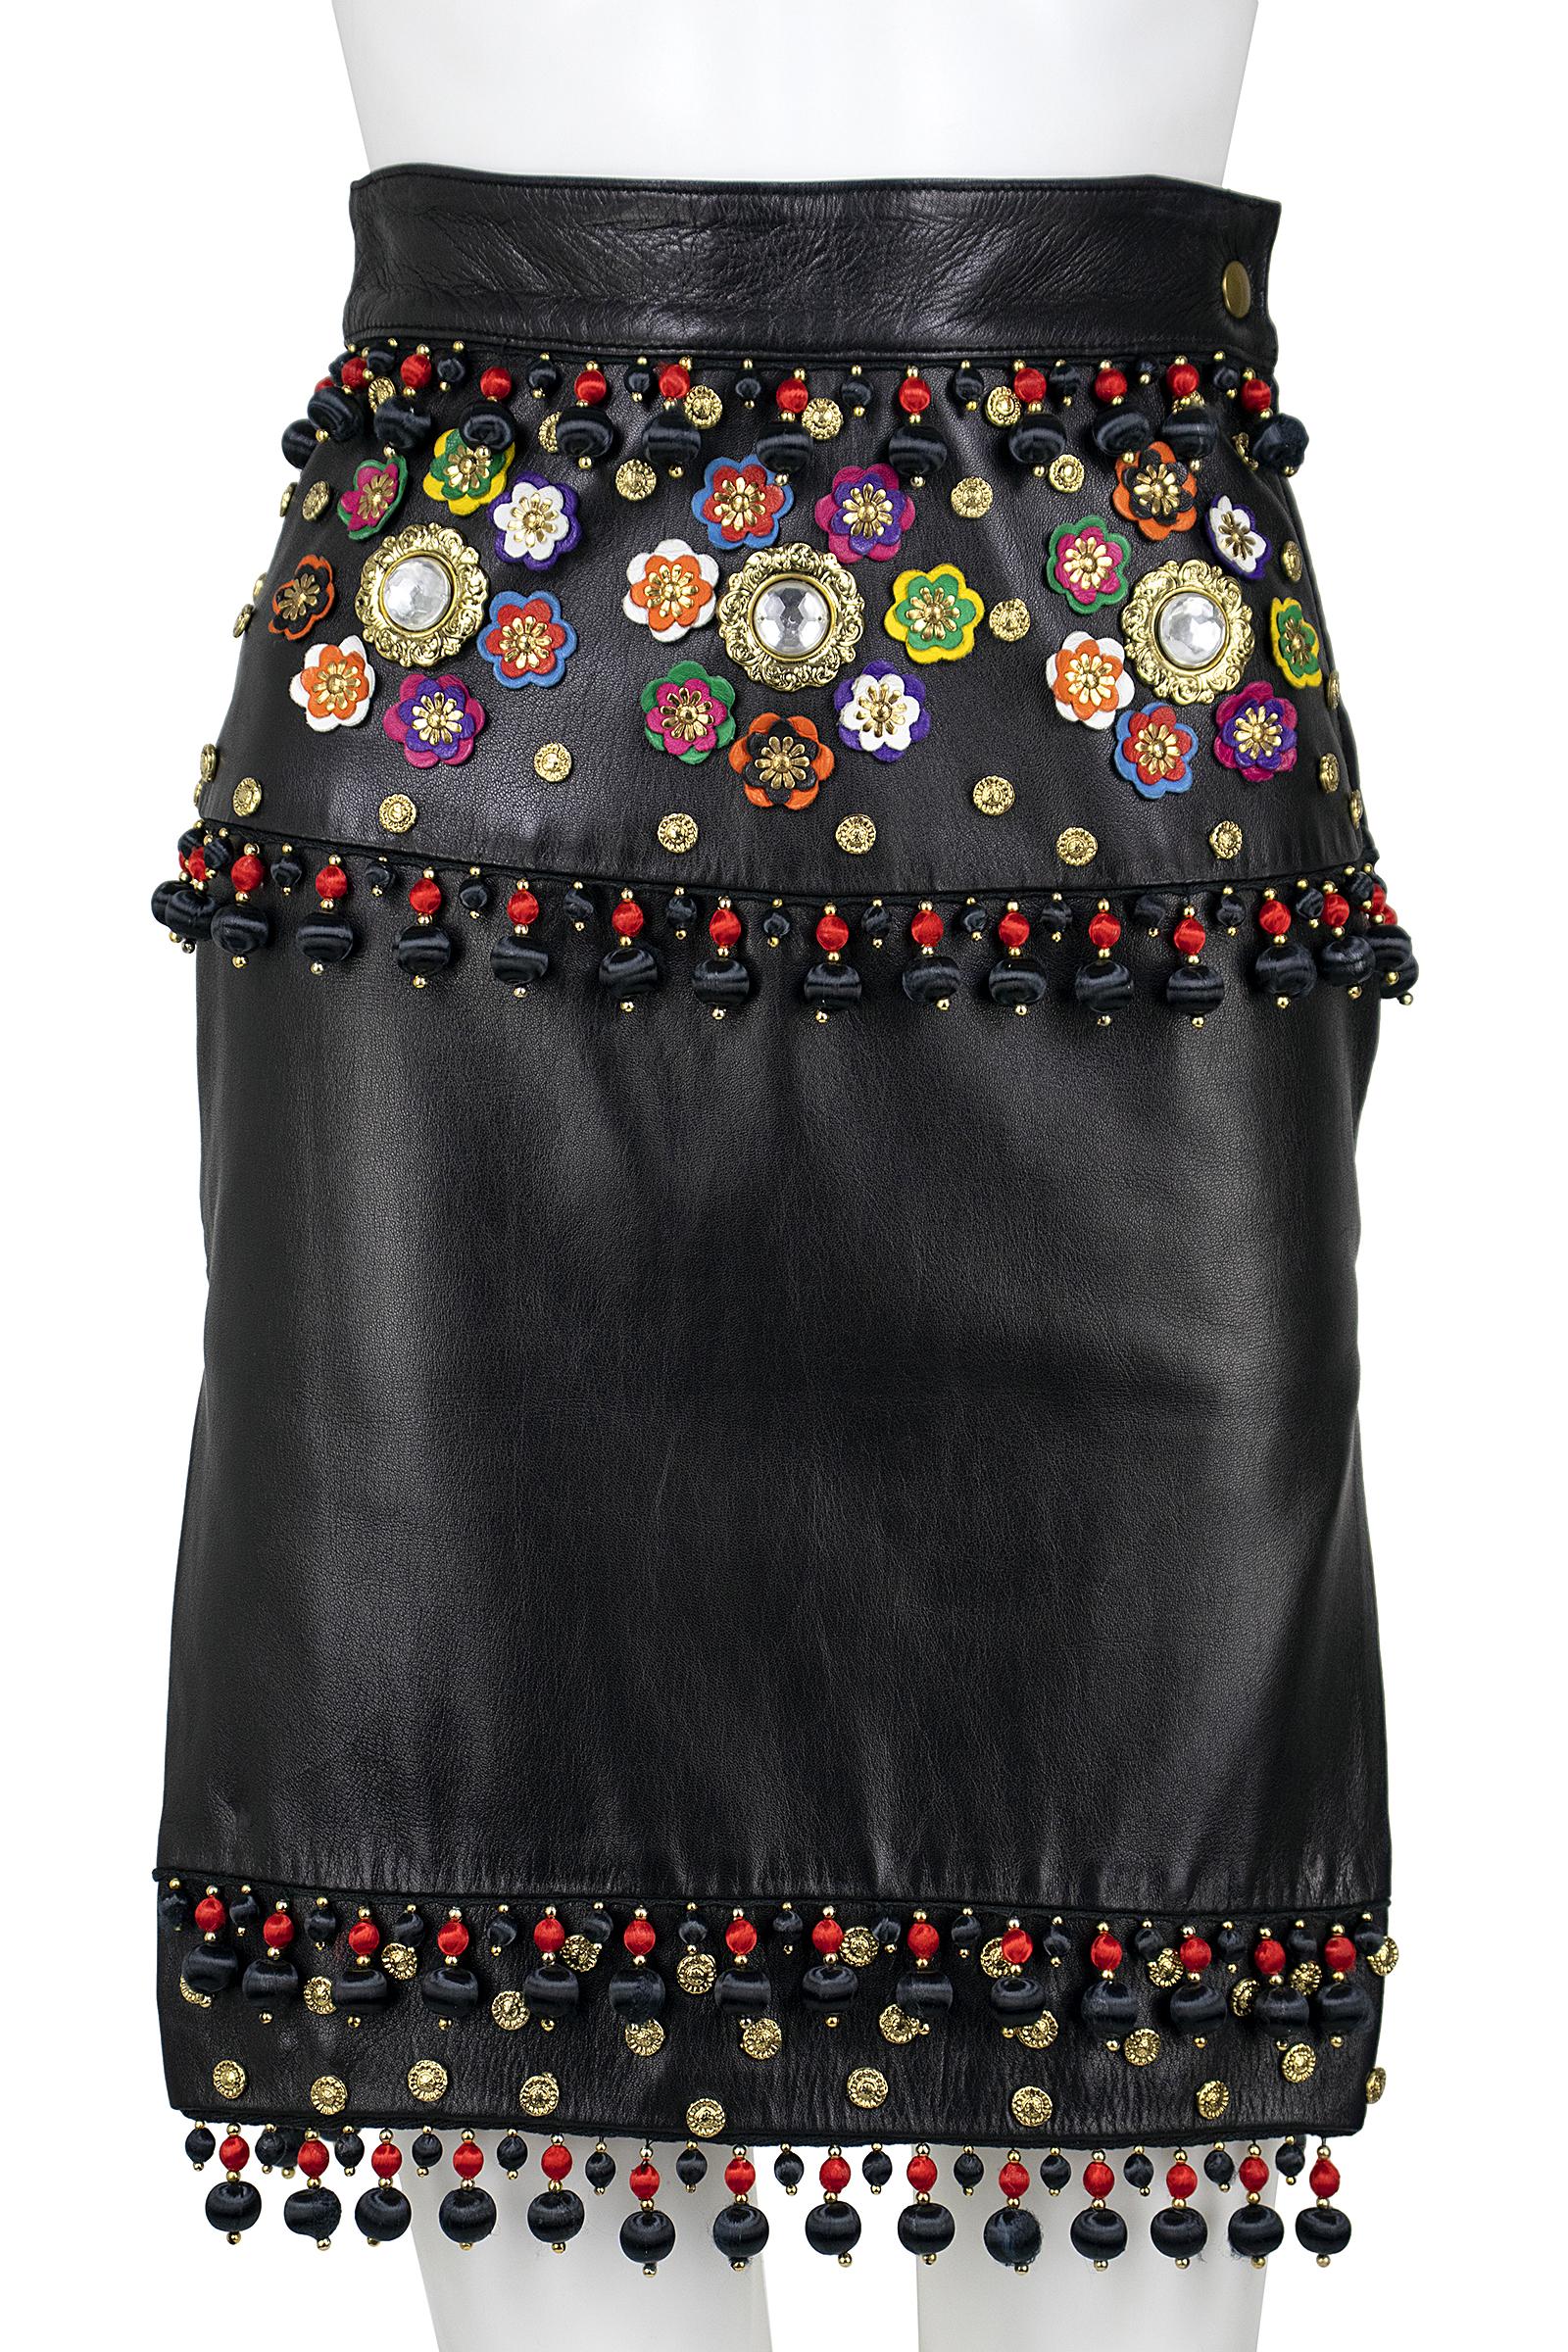 Moschino skirt 
Black leather 
Red and black beaded tassels 
Gold studs 
Colorful leather and gold flower applique 
Side zipper and snap 
Fully lined